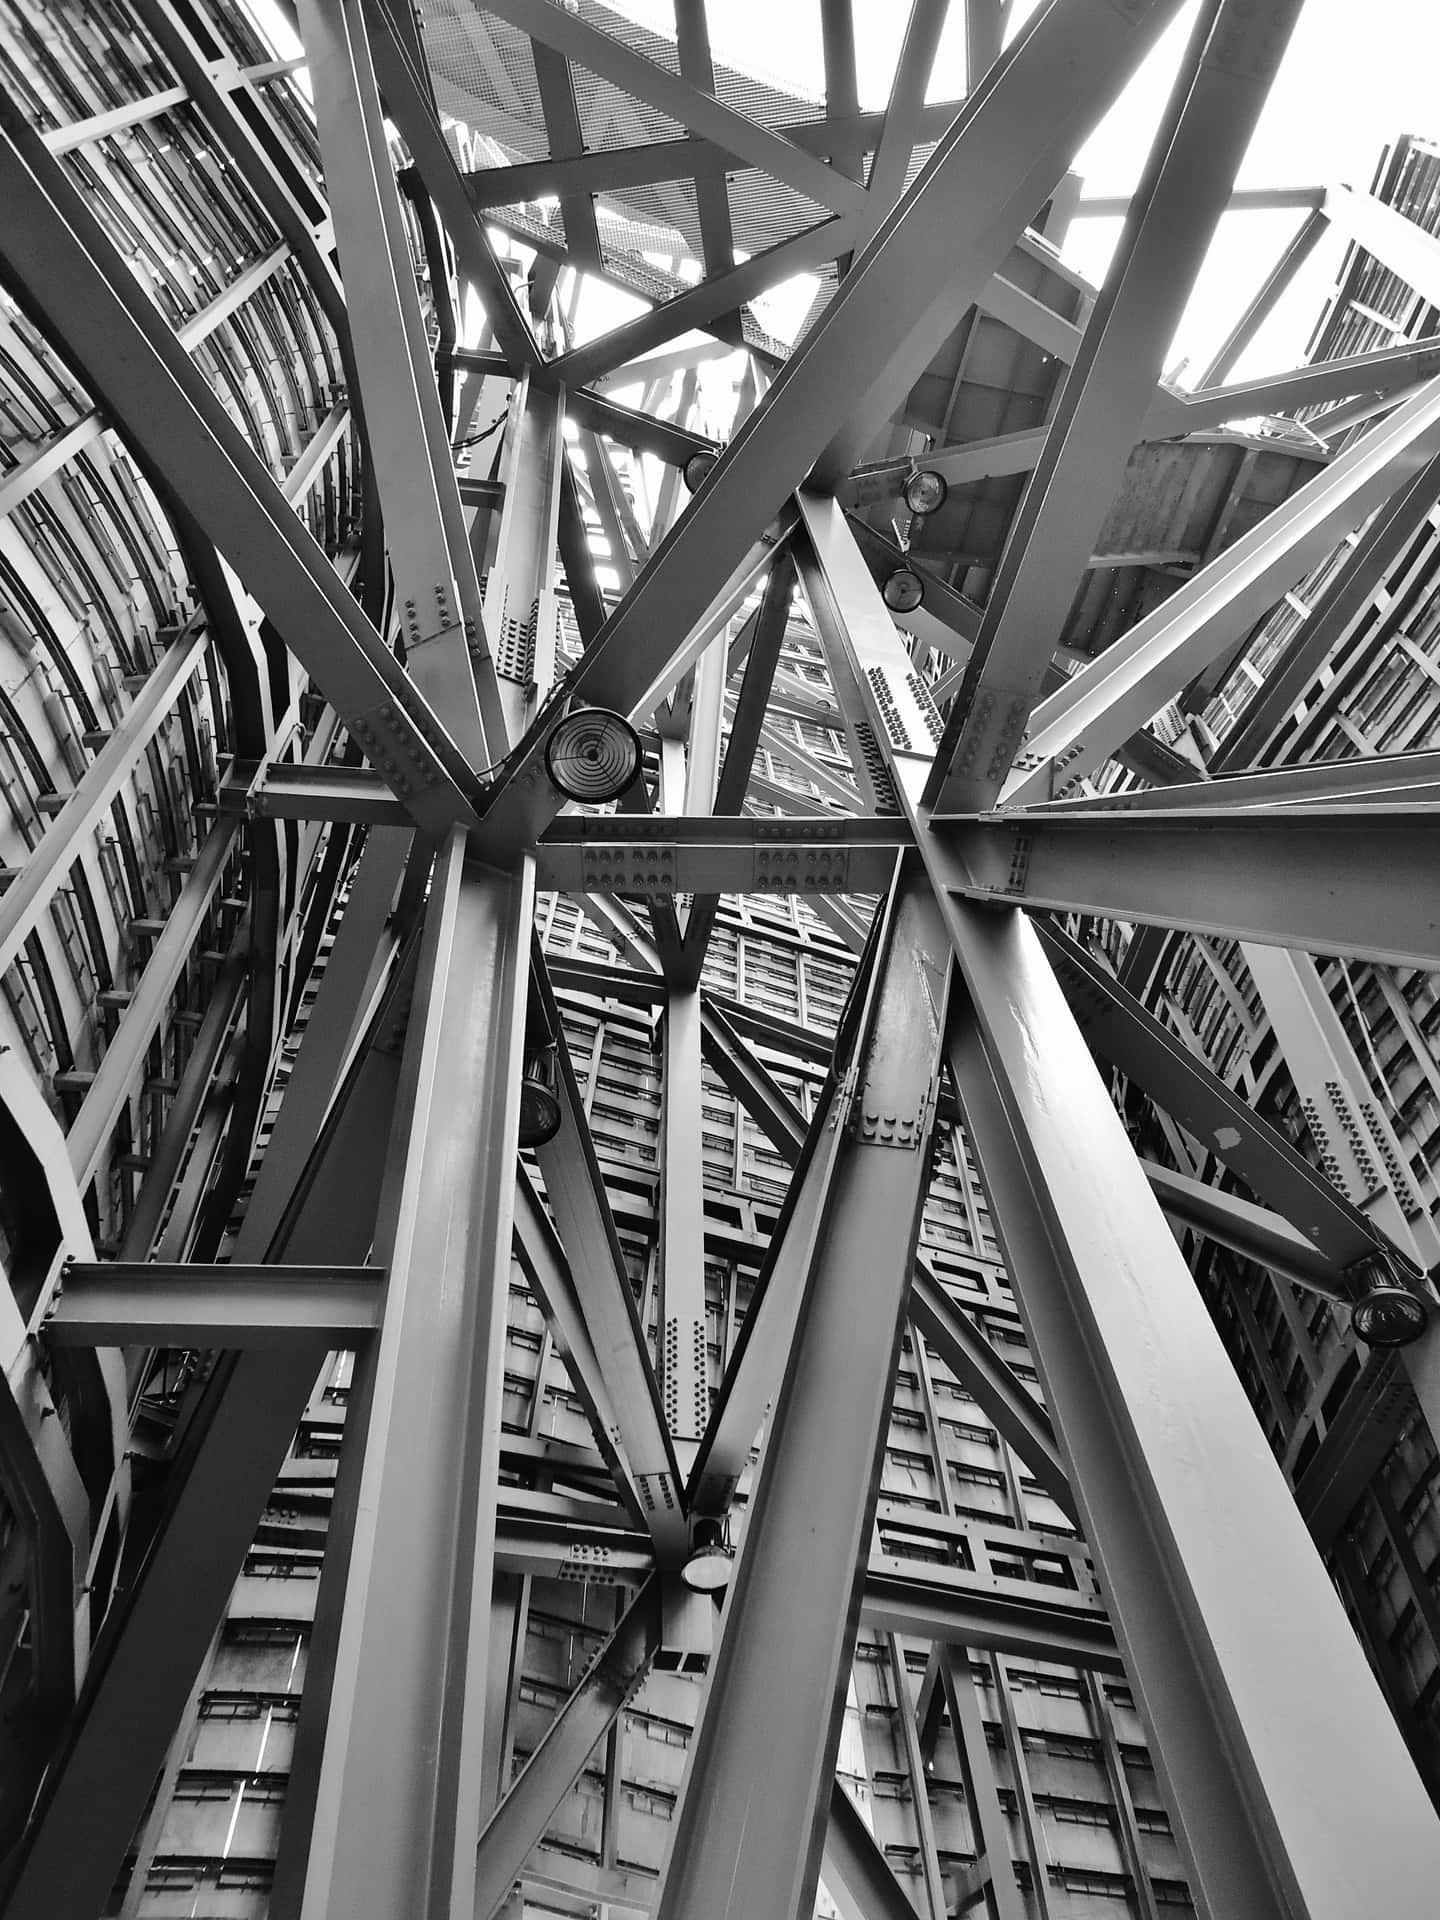 A Black And White Photo Of A Building With Metal Structures